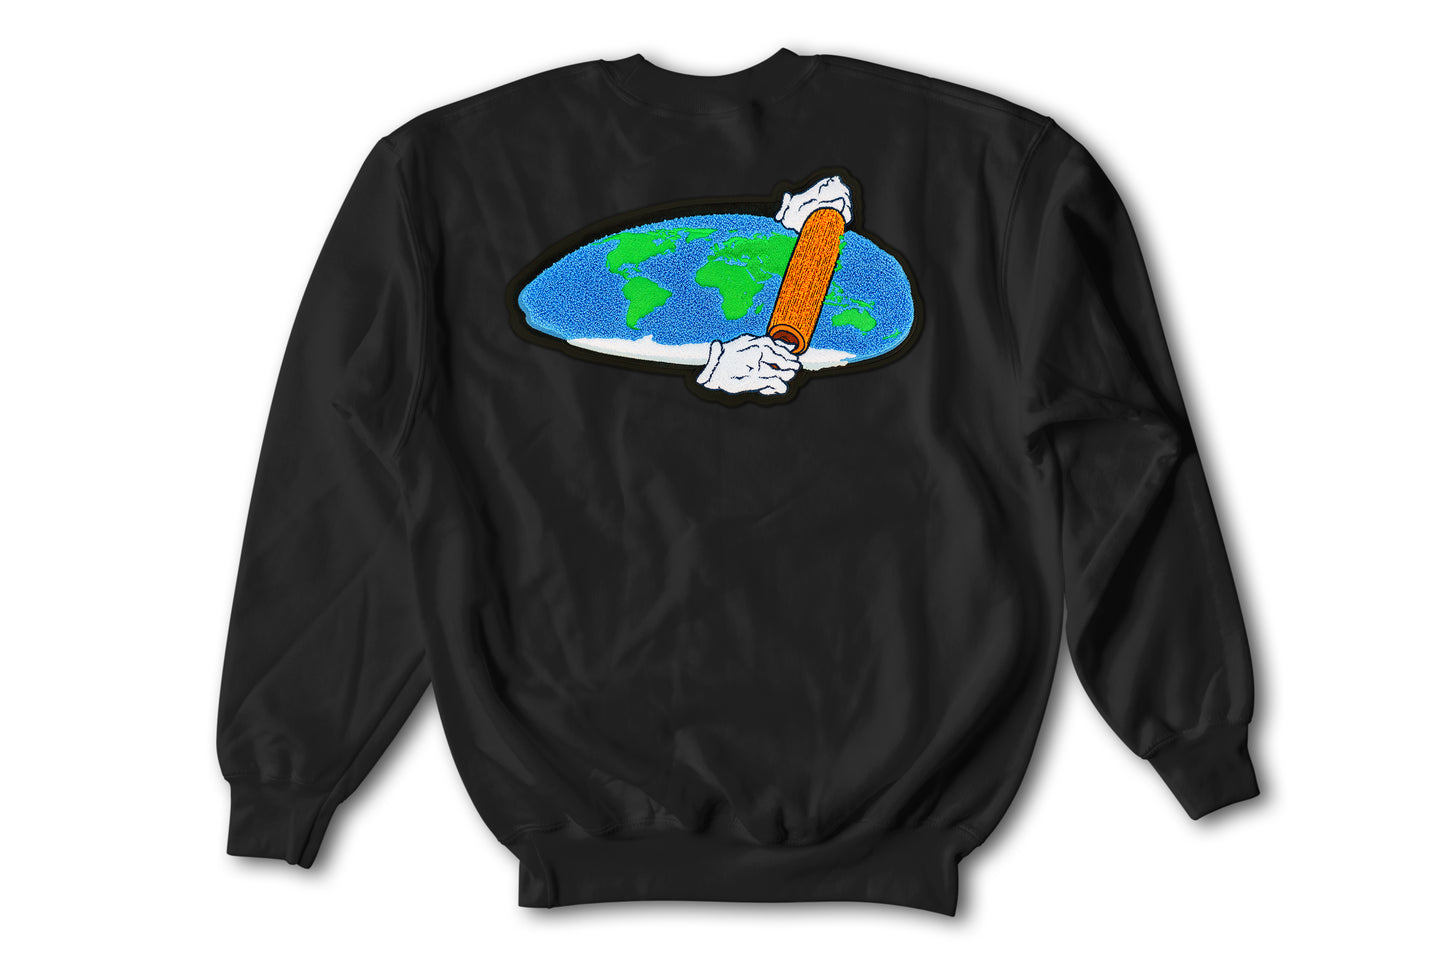 Flat Earth Theory Patch on Black Crewneck